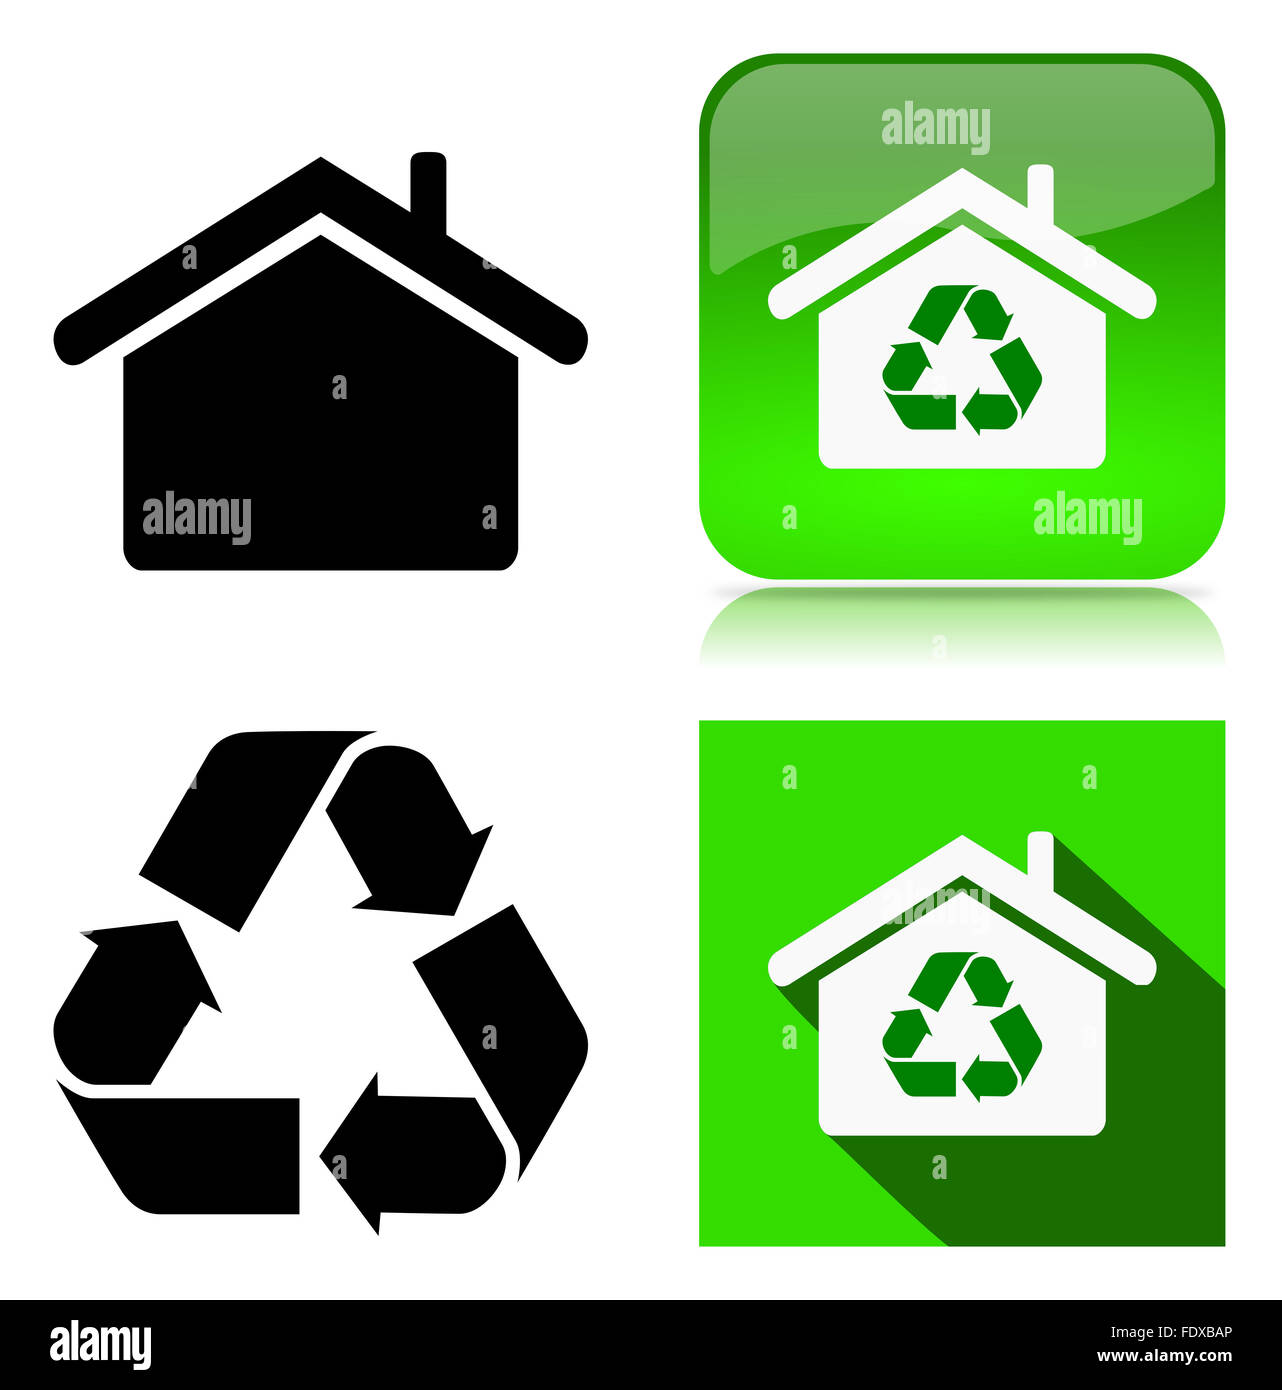 Green Home Recycle Environment Sustainable Building Icon Series Illustration on White Background Stock Photo